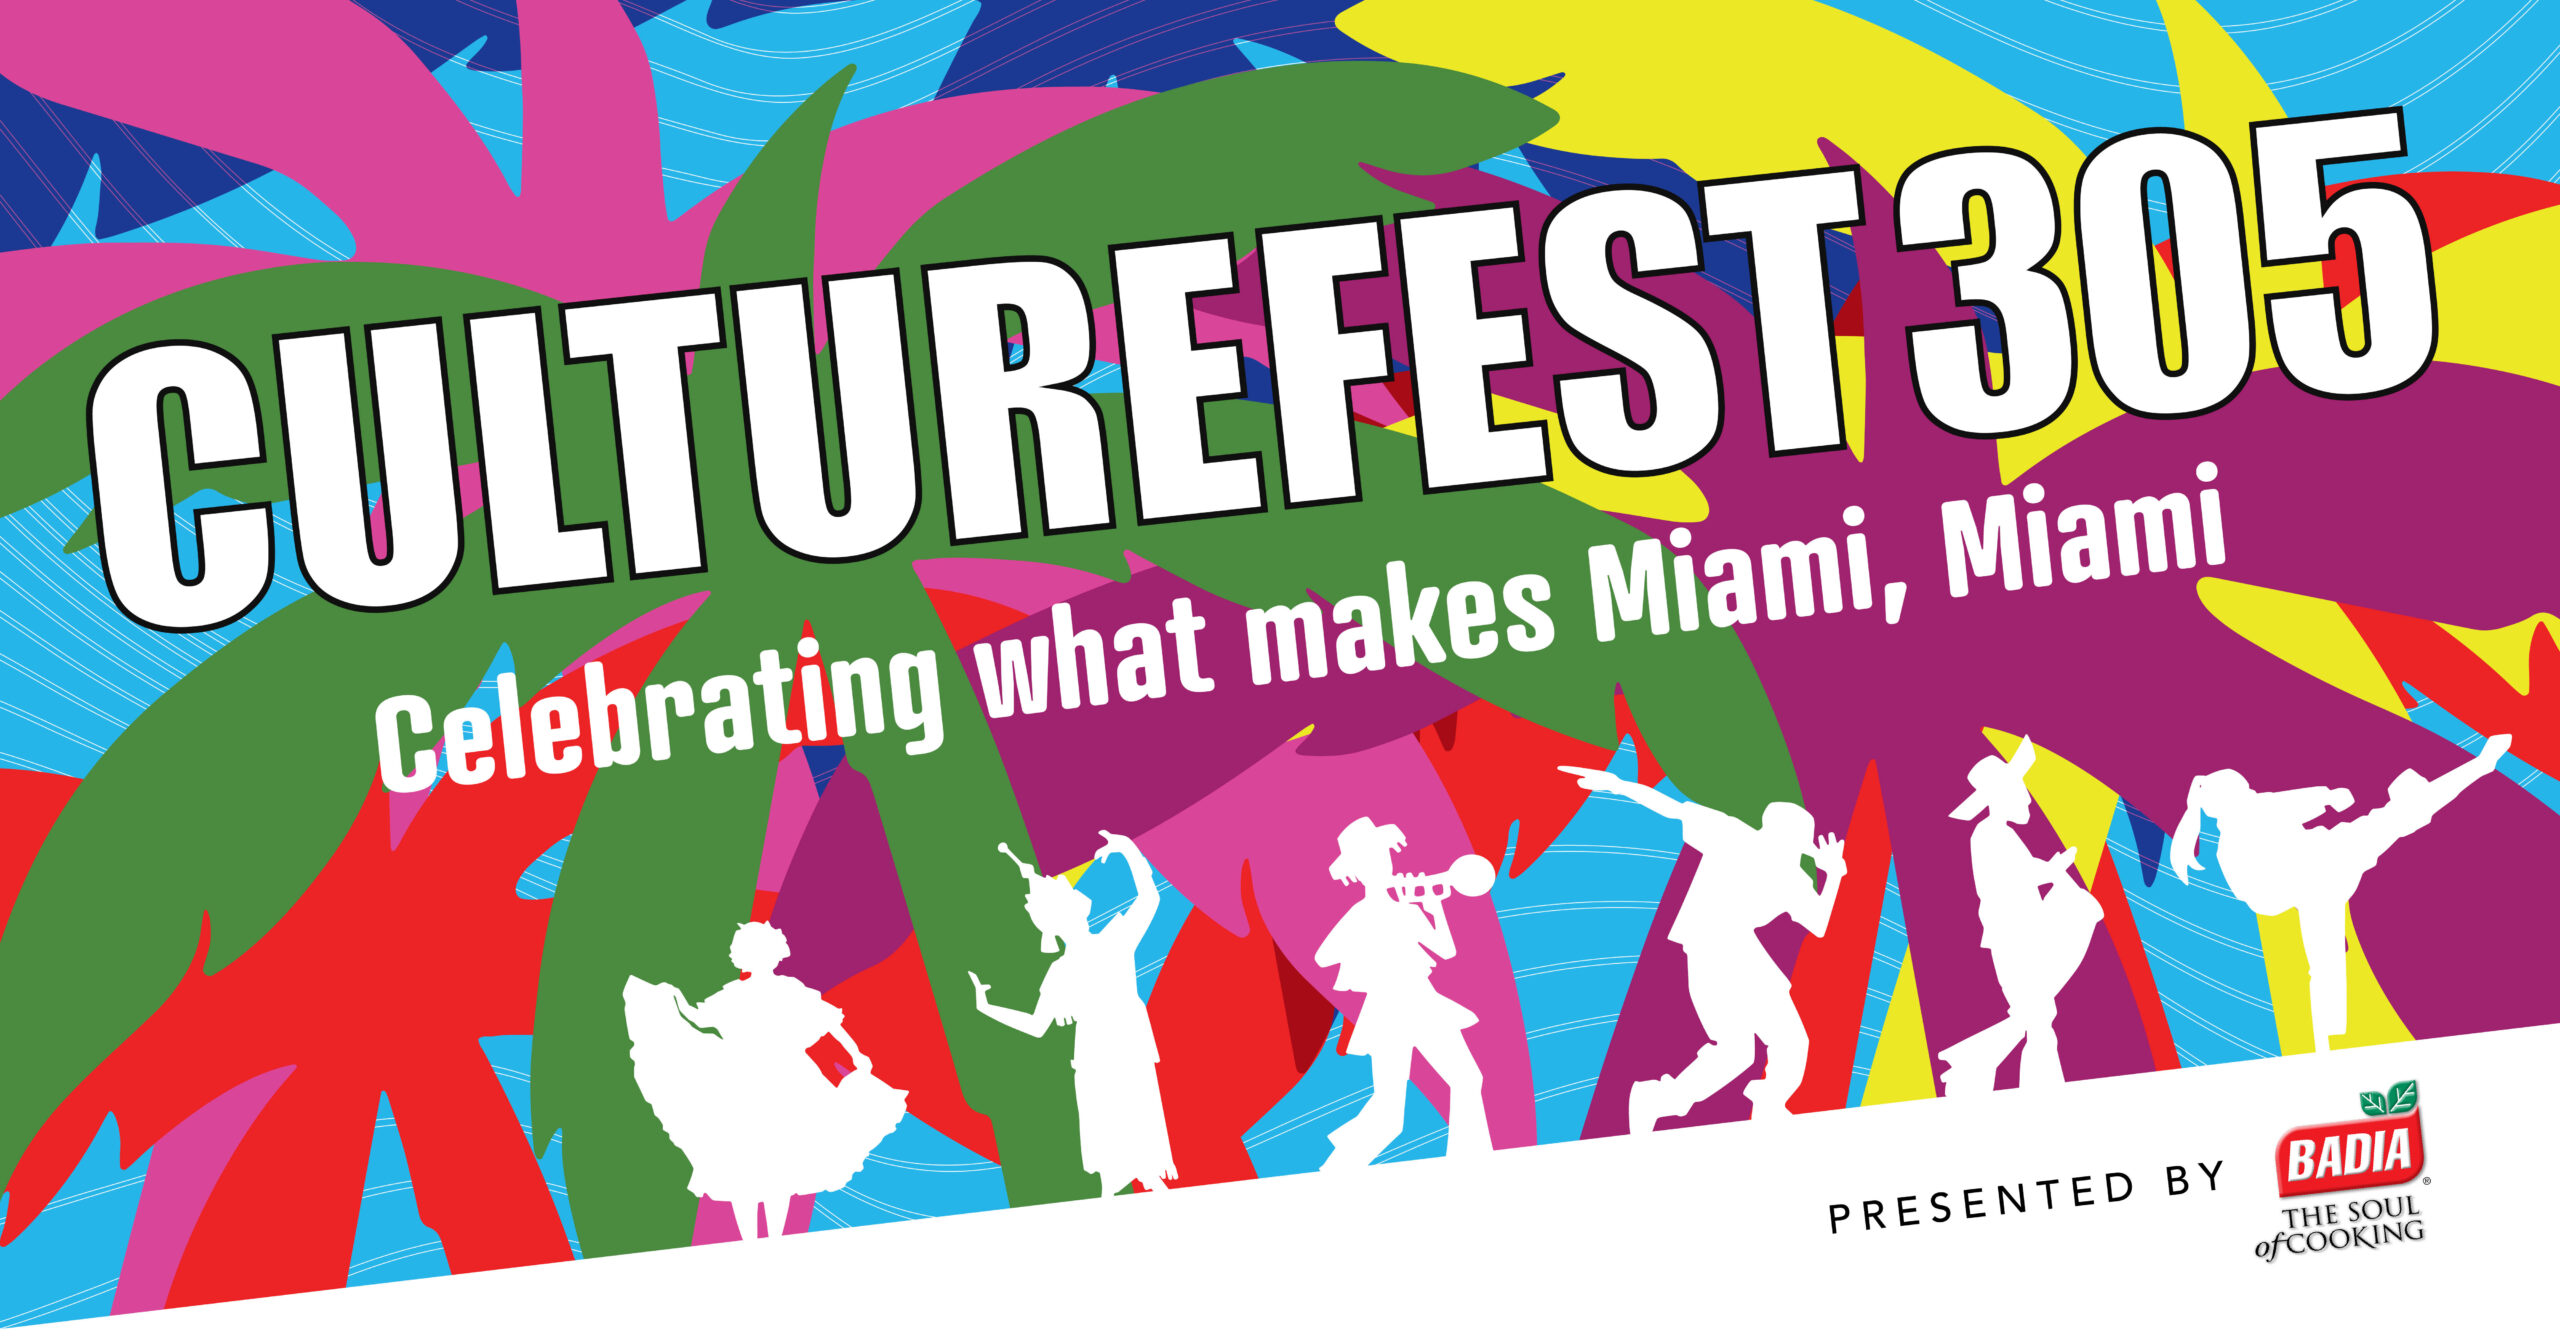 CultureFest 305 Celebrating what makes Miami, Miami. Presented by Badia Spices, Inc.